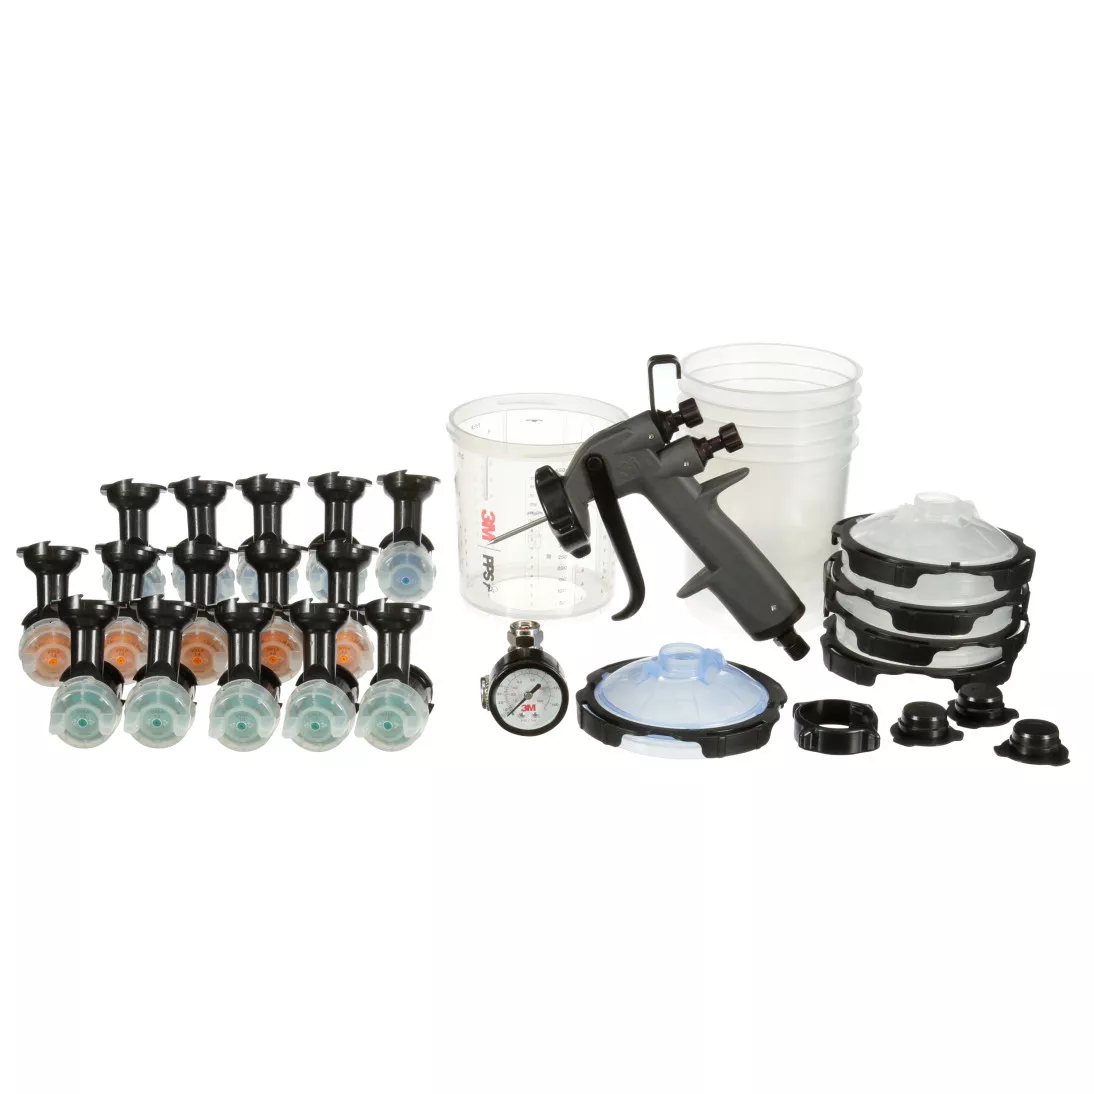 3M™ Performance Spray Gun System with PPS™ 2.0 26778, 2 Kits/Case